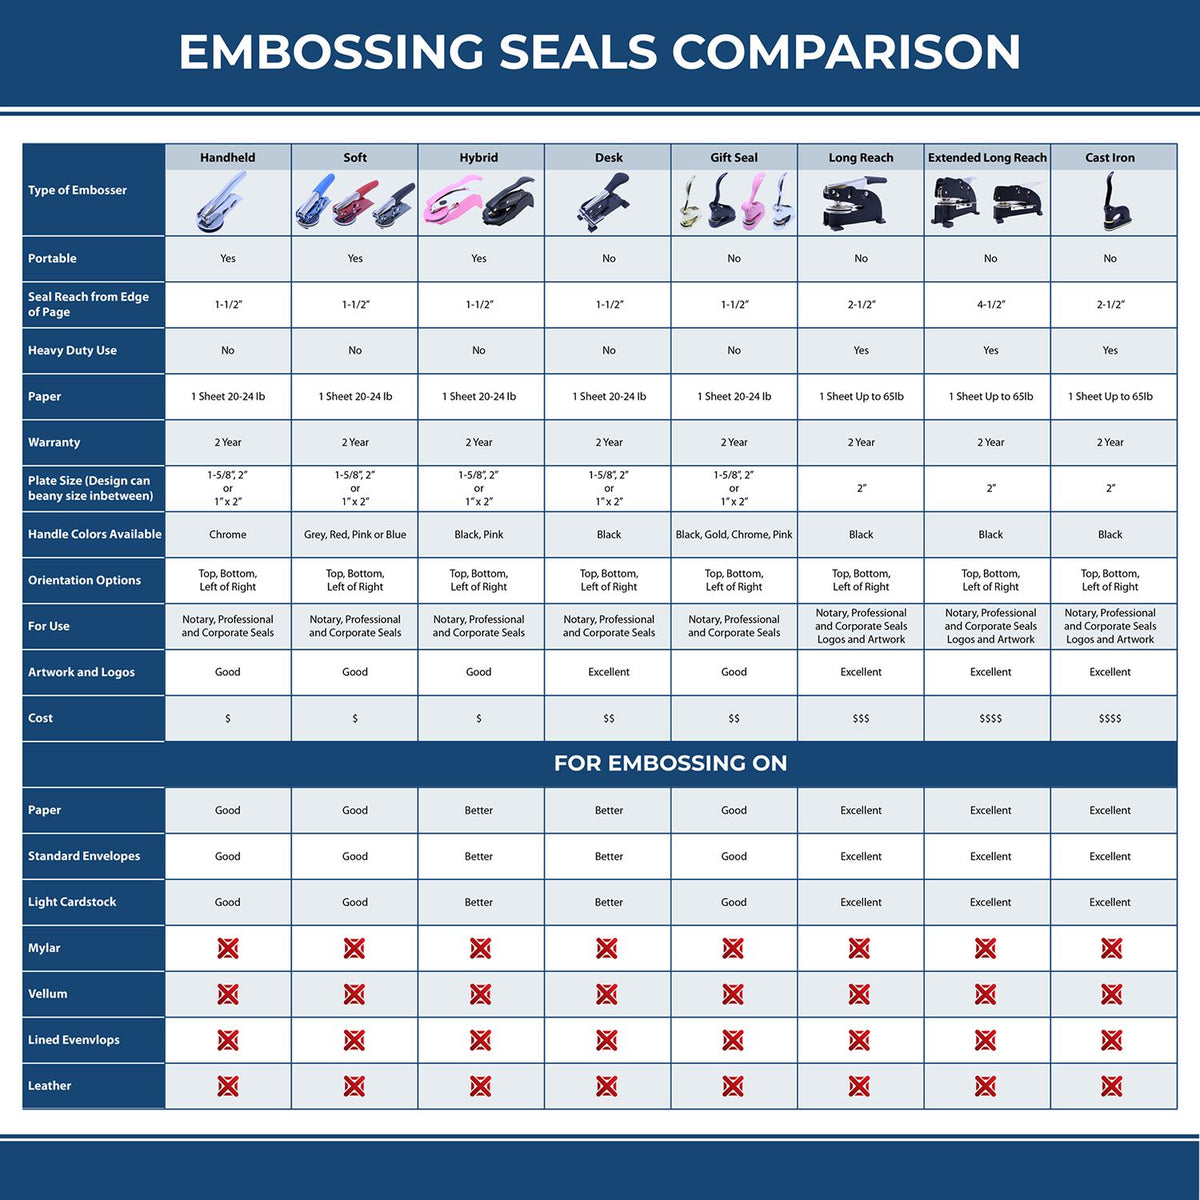 A comparison chart for the different types of mount models available for the Soft Pocket Kansas Landscape Architect Embosser.